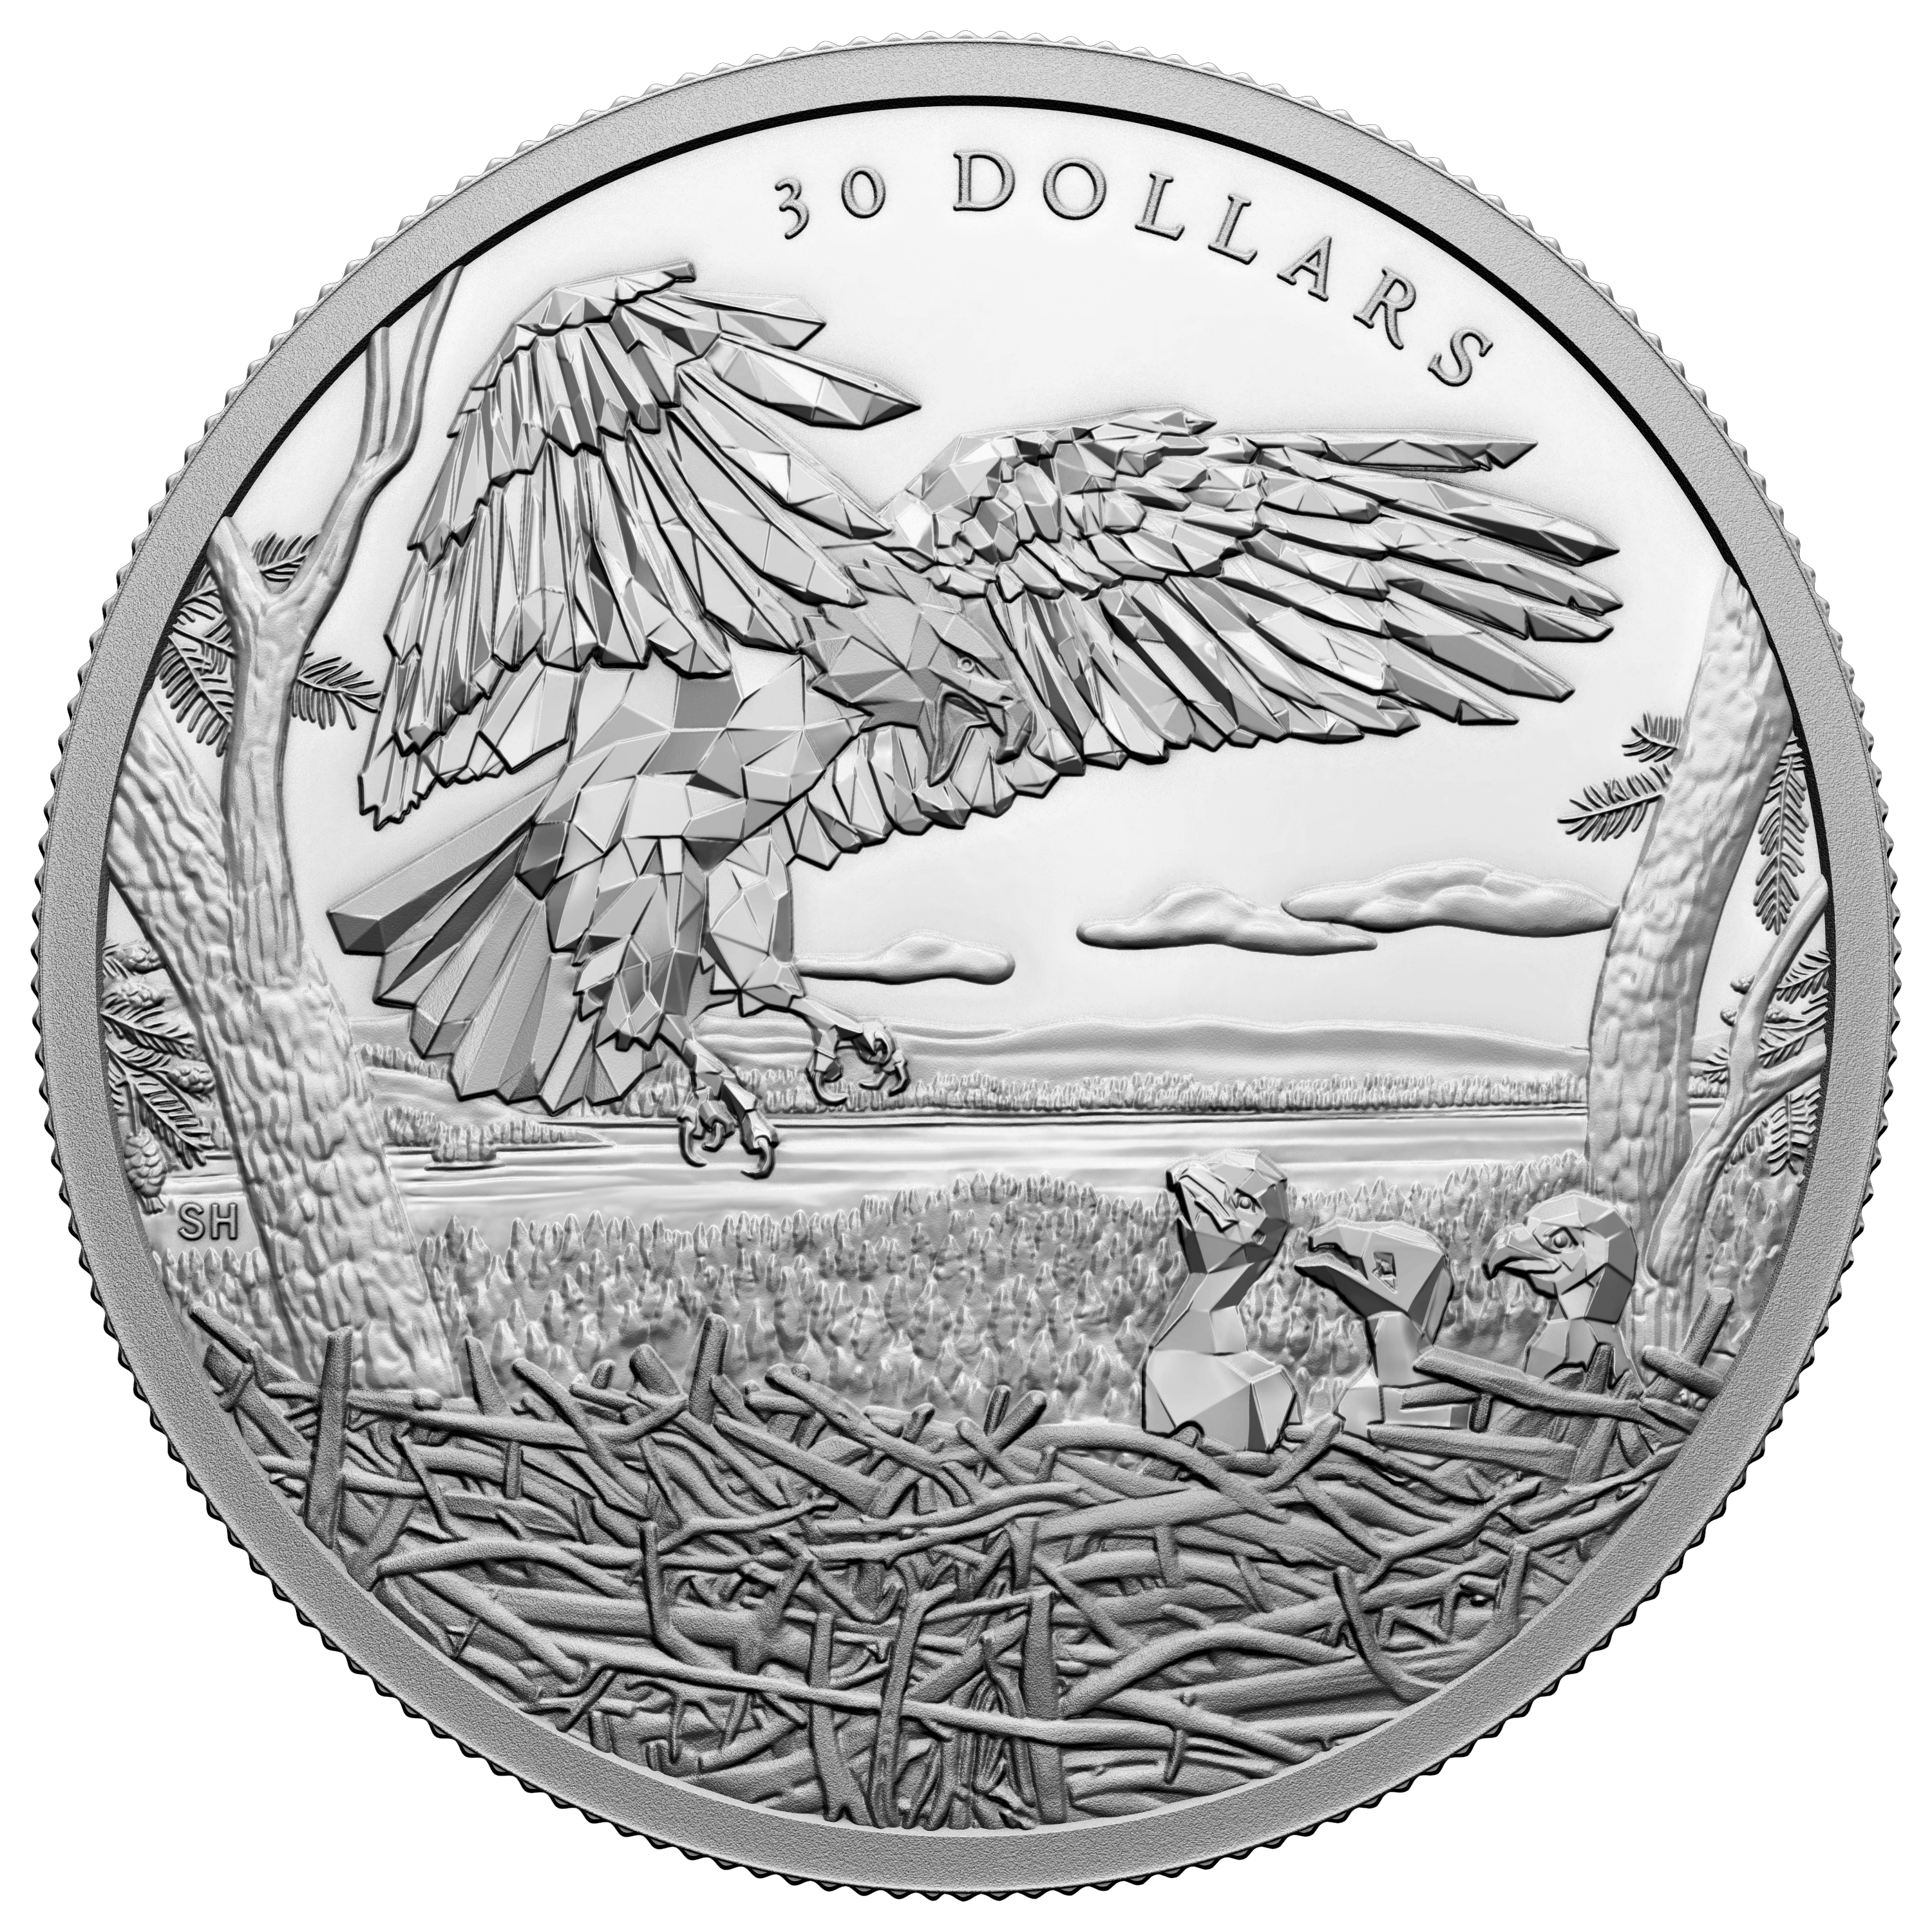 BALD EAGLES Multifaceted Animals 2 Oz Silver Coin $30 Canada 2022